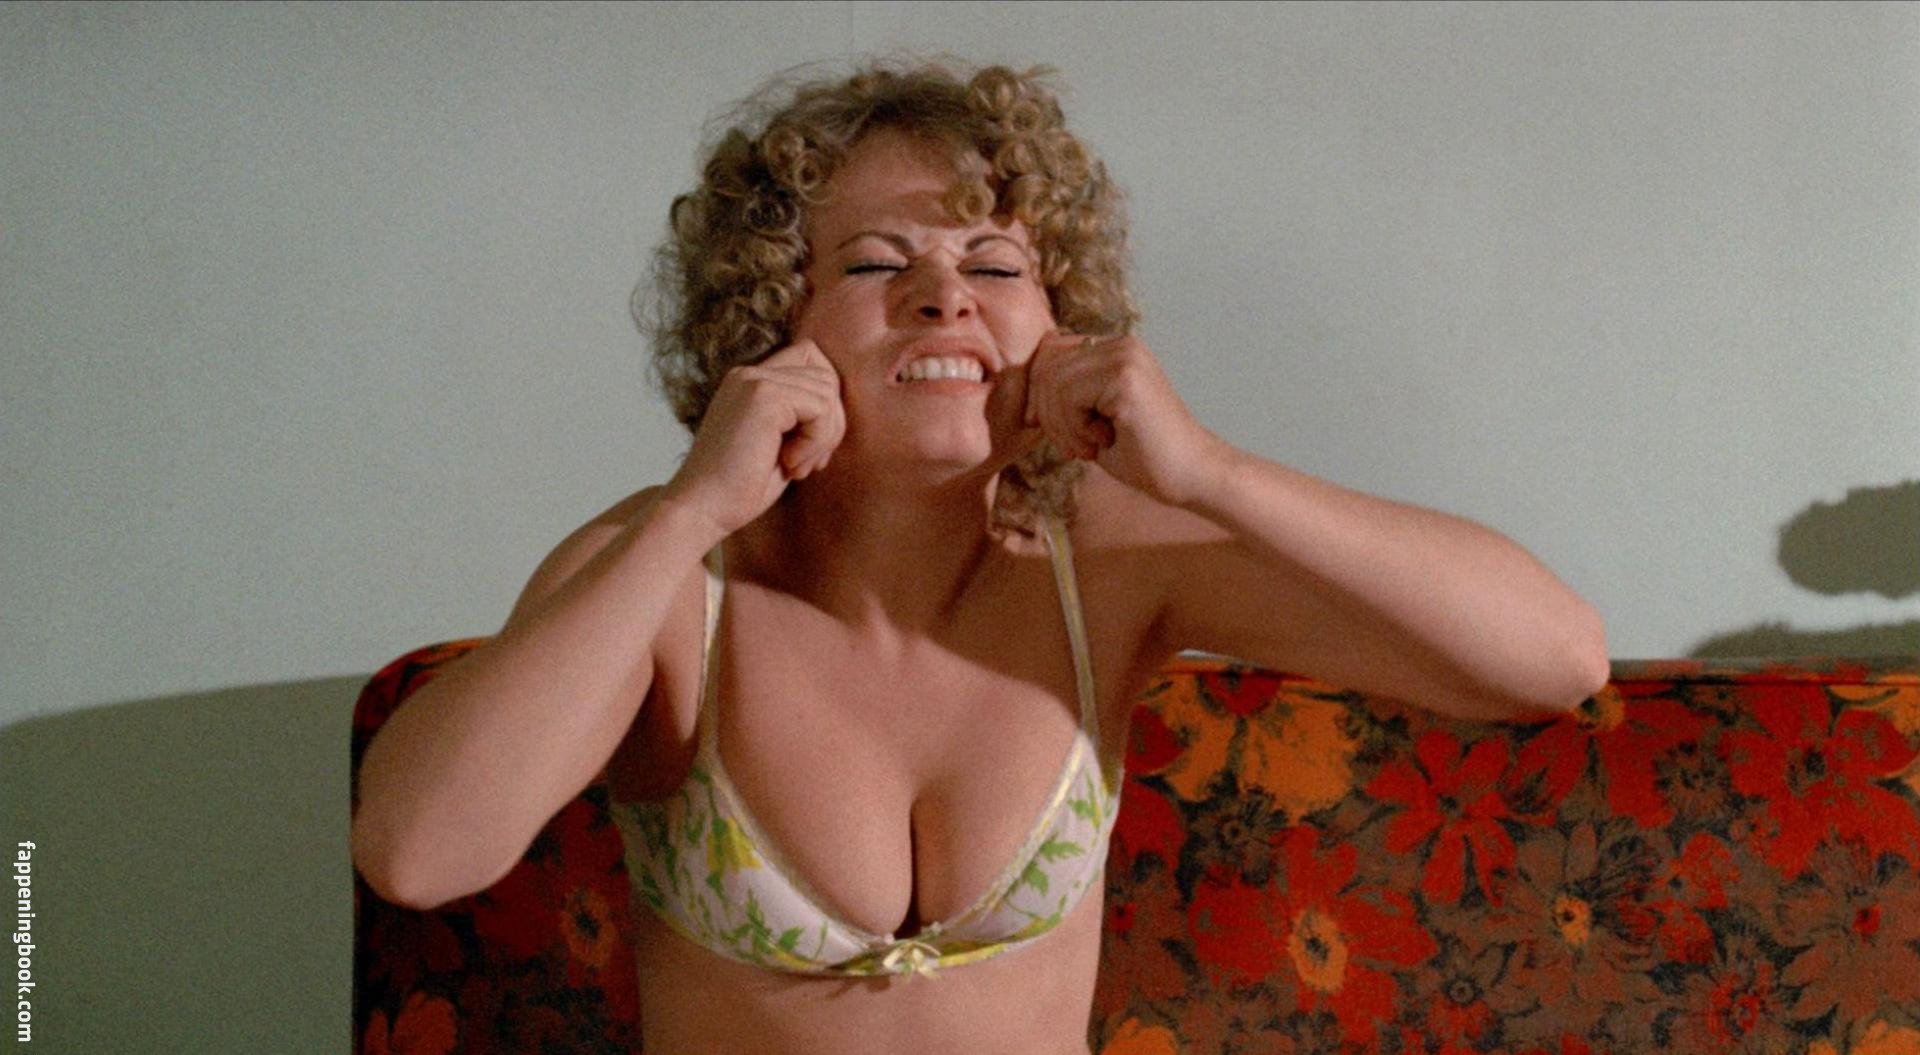 Sally Struthers Nude, The Fappening - Photo #473956 - FappeningBook.